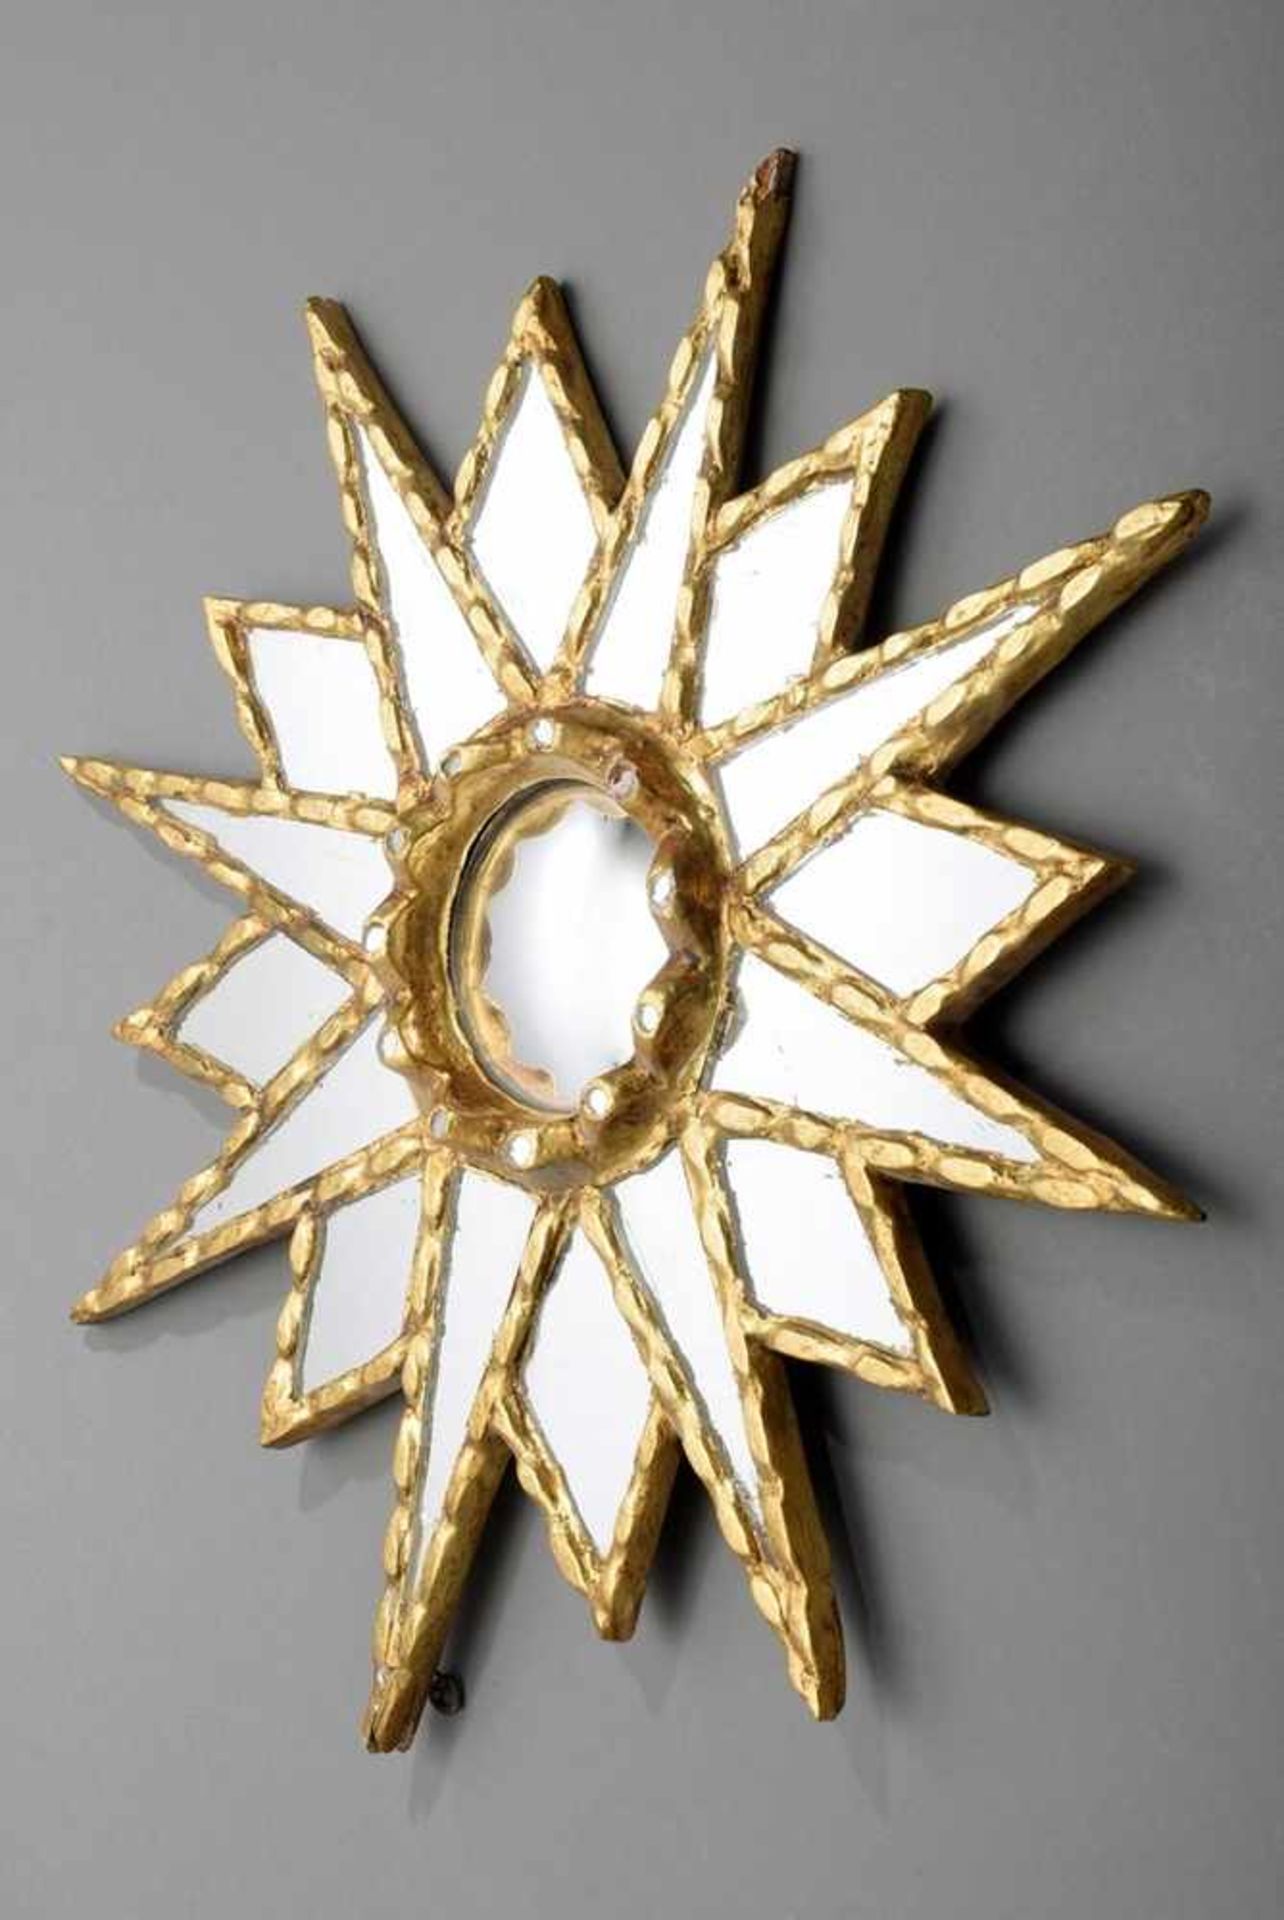 Small Midcentury mirror "Star", wood and plaster, gold plated, 48x46cm, small defects